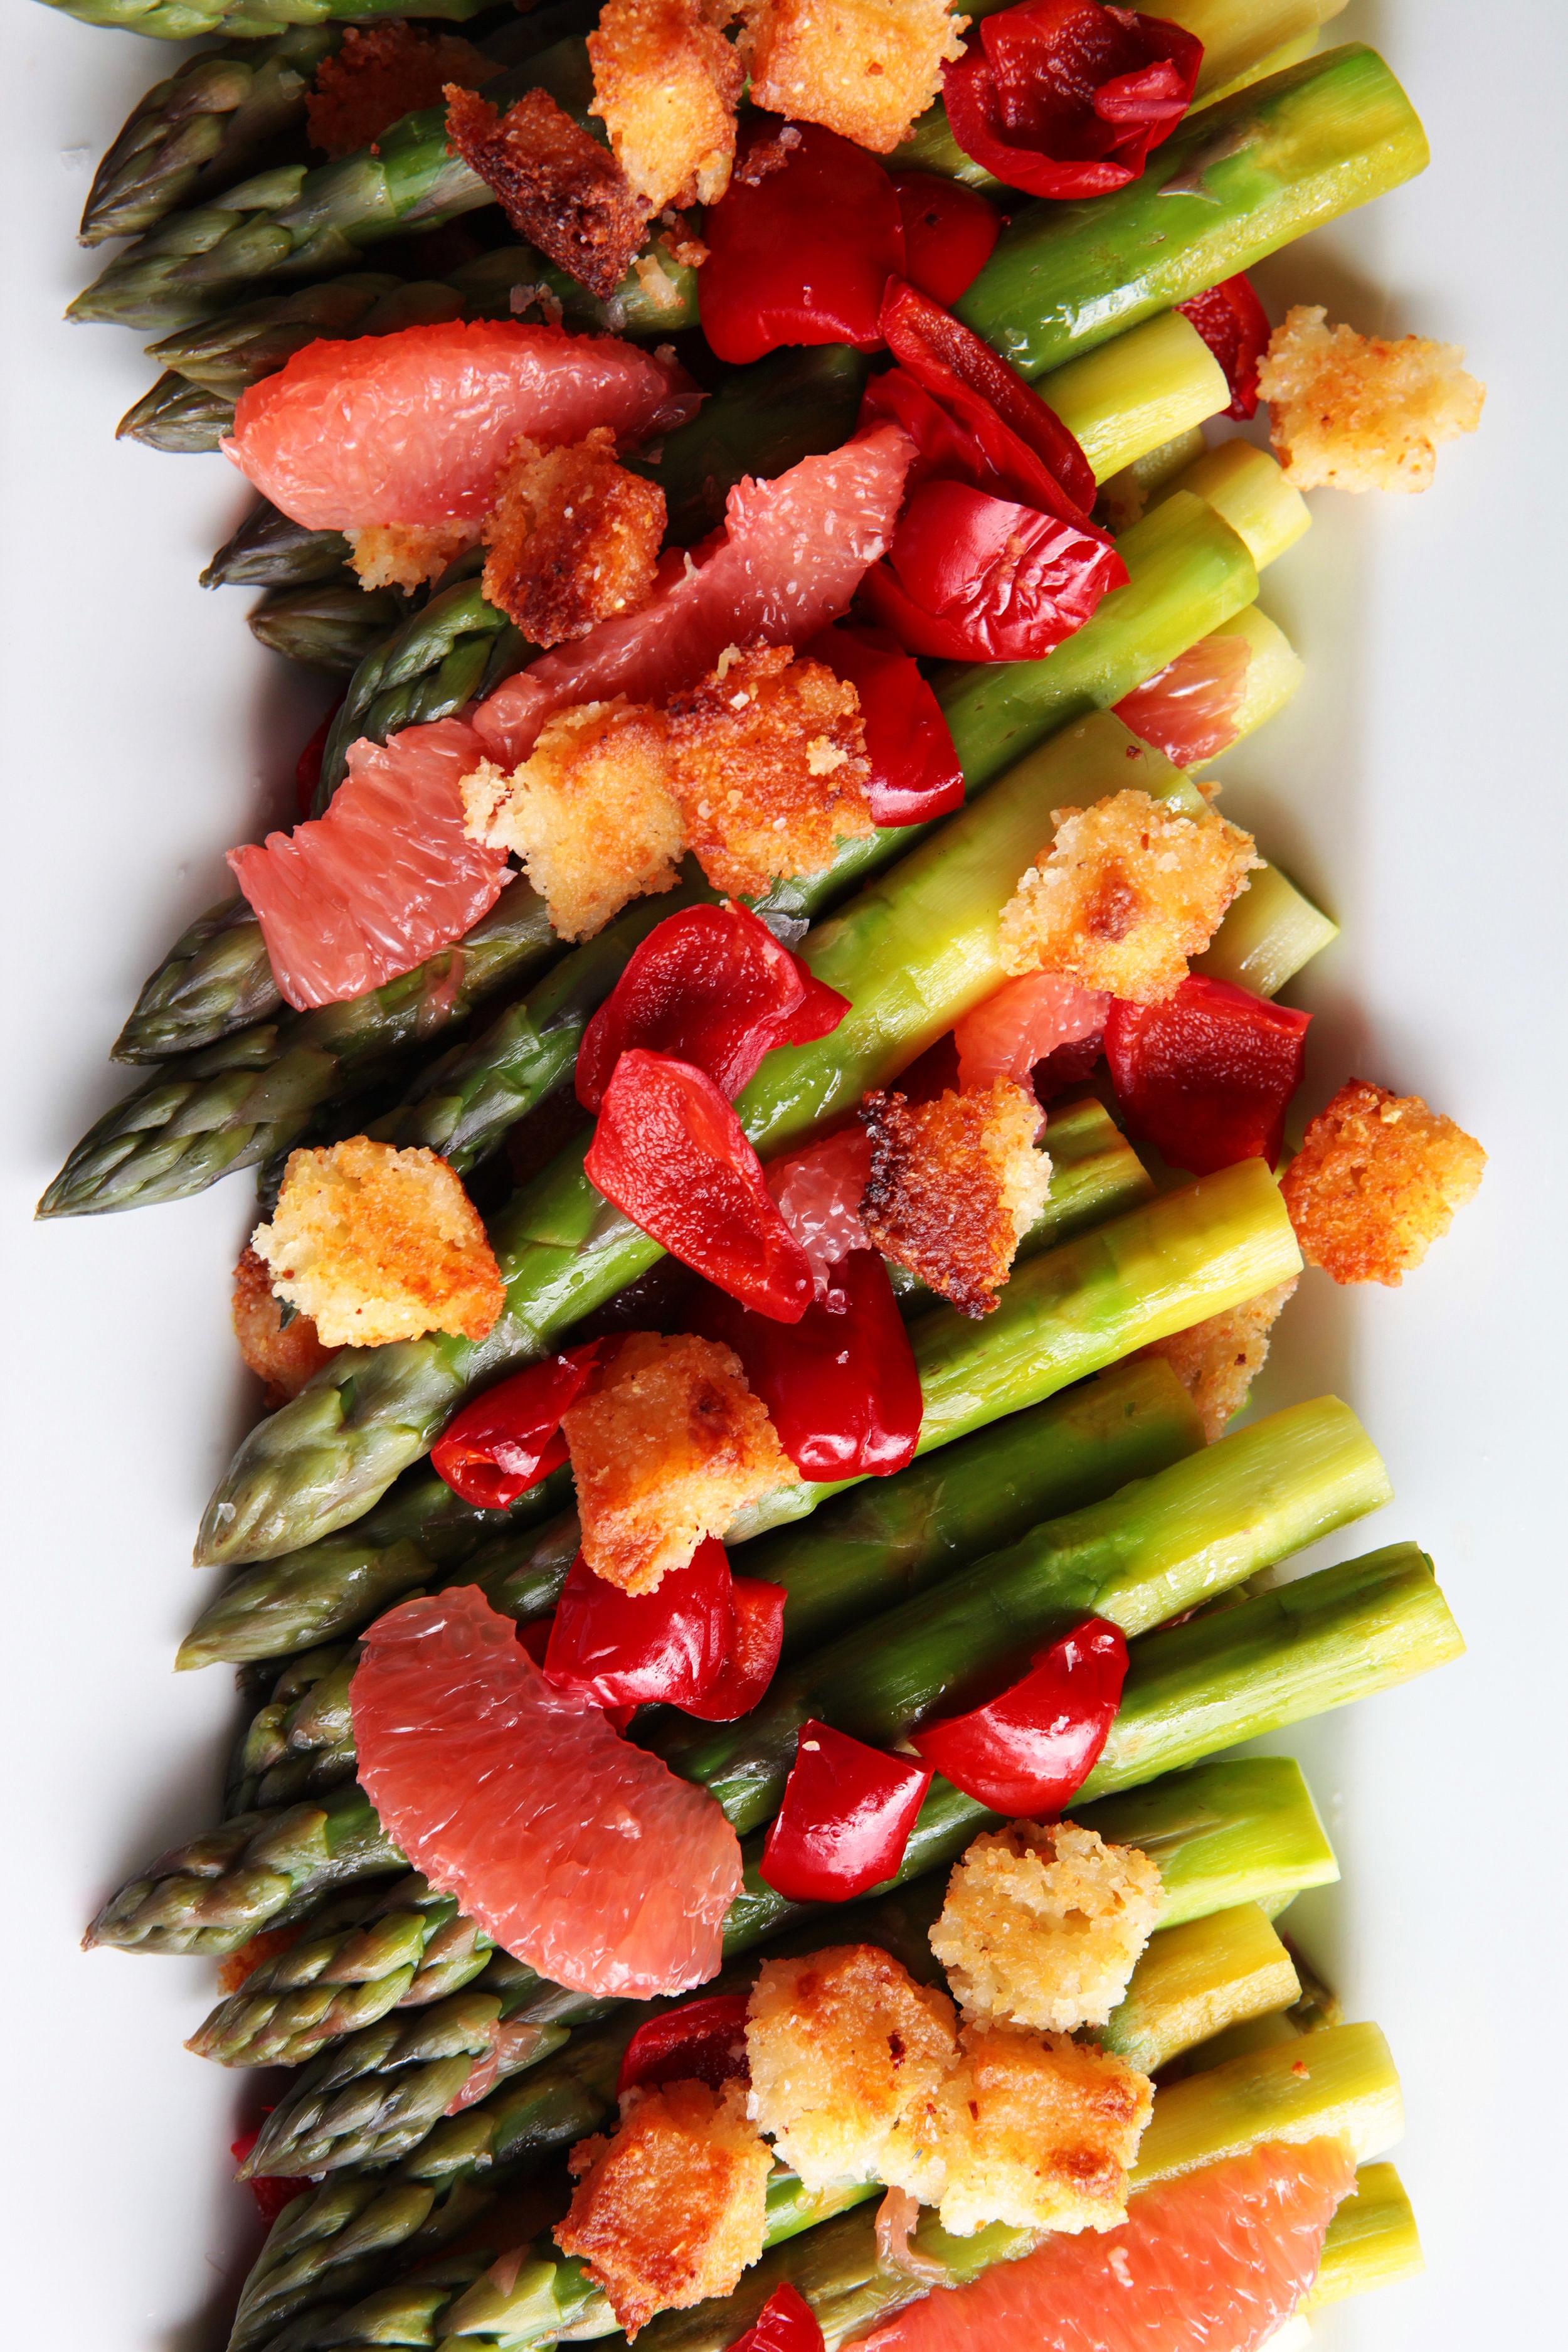 Asparagus salad with grapefruit, red peppers and croutons